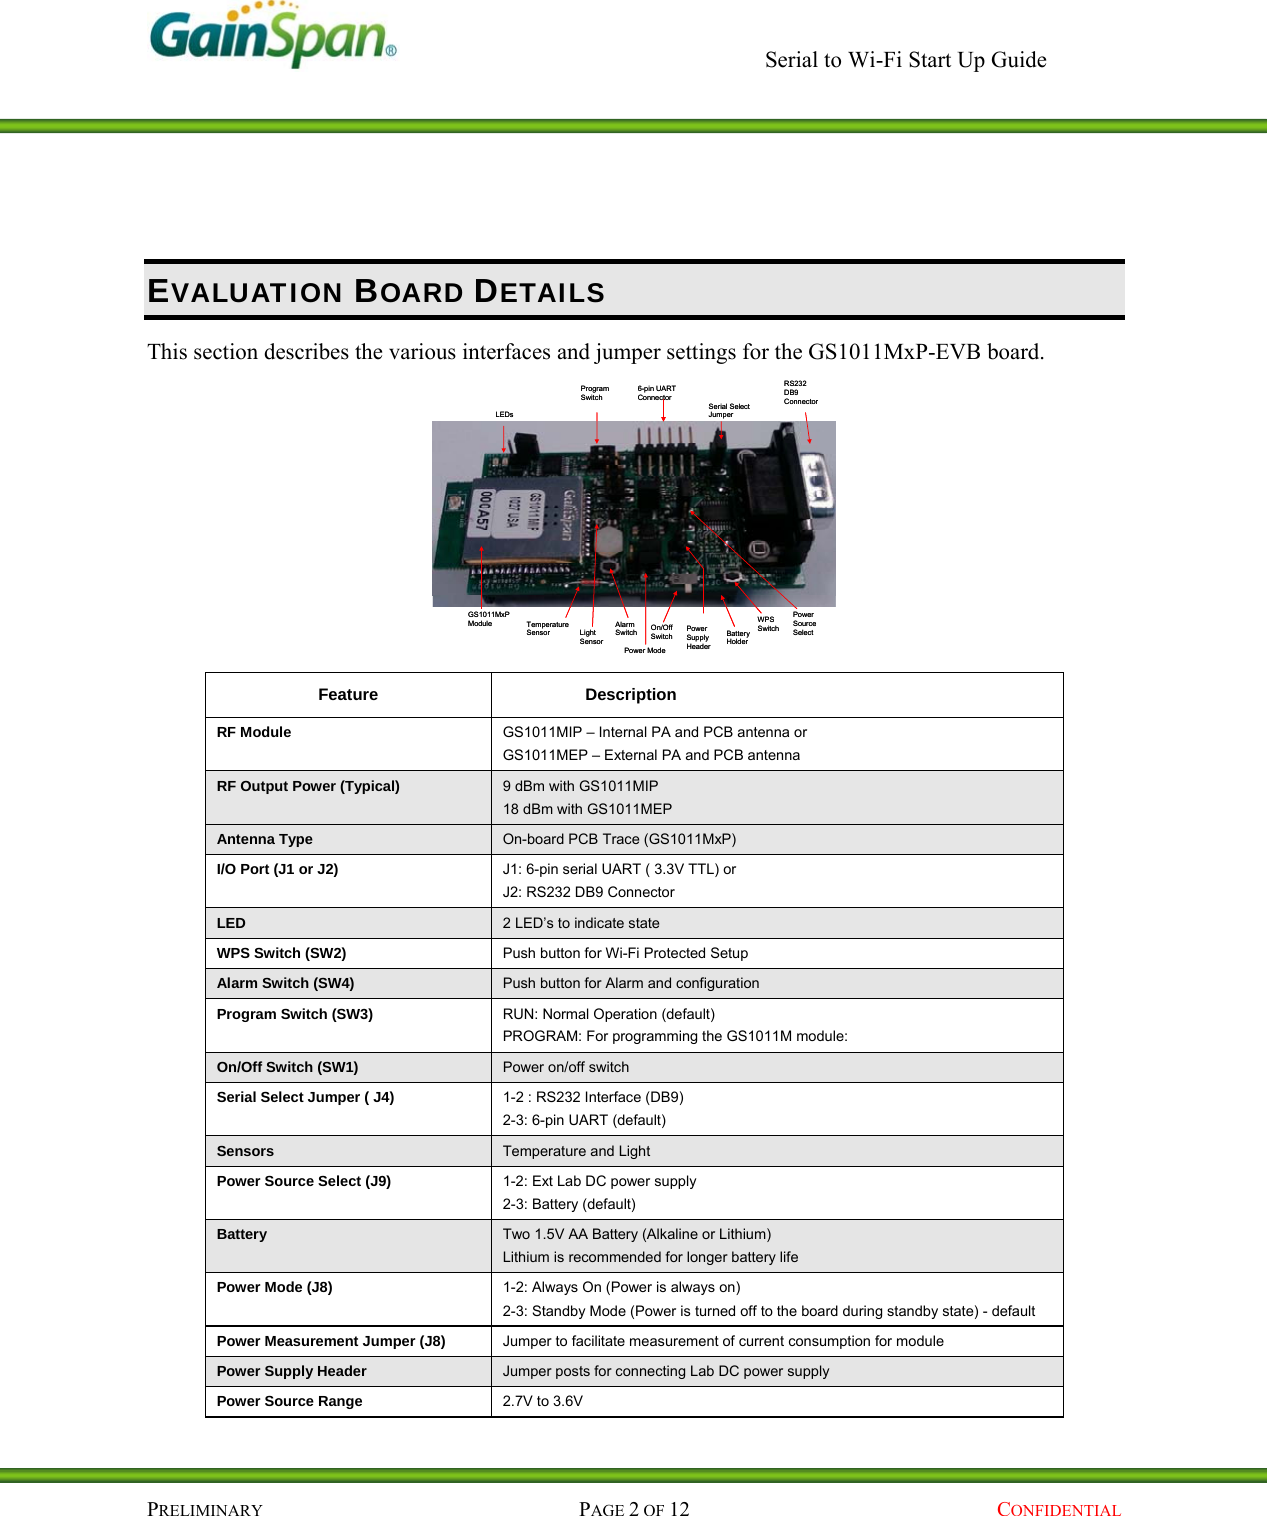     Serial to Wi-Fi Start Up Guide    PRELIMINARY PAGE 2 OF 12  CONFIDENTIAL EVALUATION BOARD DETAILS This section describes the various interfaces and jumper settings for the GS1011MxP-EVB board. 6-pin UARTConnectorGS1011MxPModule TemperatureSensor LightSensorAlarmSwitch On/OffSwitchPowerSupplyHeaderWPSSwitchRS232DB9ConnectorSerial SelectJumperProgramSwitchLEDsPowerSourceSelectBatteryHolderPower Mode6-pin UARTConnectorGS1011MxPModule TemperatureSensor LightSensorAlarmSwitch On/OffSwitchPowerSupplyHeaderWPSSwitchRS232DB9ConnectorSerial SelectJumperProgramSwitchLEDsPowerSourceSelectBatteryHolderPower Mode Feature Description RF Module  GS1011MIP – Internal PA and PCB antenna or GS1011MEP – External PA and PCB antenna RF Output Power (Typical)  9 dBm with GS1011MIP 18 dBm with GS1011MEP Antenna Type  On-board PCB Trace (GS1011MxP)  I/O Port (J1 or J2)  J1: 6-pin serial UART ( 3.3V TTL) or  J2: RS232 DB9 Connector LED  2 LED’s to indicate state WPS Switch (SW2)  Push button for Wi-Fi Protected Setup Alarm Switch (SW4)  Push button for Alarm and configuration Program Switch (SW3)  RUN: Normal Operation (default) PROGRAM: For programming the GS1011M module:  On/Off Switch (SW1)  Power on/off switch Serial Select Jumper ( J4)  1-2 : RS232 Interface (DB9) 2-3: 6-pin UART (default) Sensors  Temperature and Light Power Source Select (J9)  1-2: Ext Lab DC power supply 2-3: Battery (default) Battery  Two 1.5V AA Battery (Alkaline or Lithium) Lithium is recommended for longer battery life Power Mode (J8)  1-2: Always On (Power is always on) 2-3: Standby Mode (Power is turned off to the board during standby state) - default Power Measurement Jumper (J8)  Jumper to facilitate measurement of current consumption for module Power Supply Header  Jumper posts for connecting Lab DC power supply Power Source Range  2.7V to 3.6V 